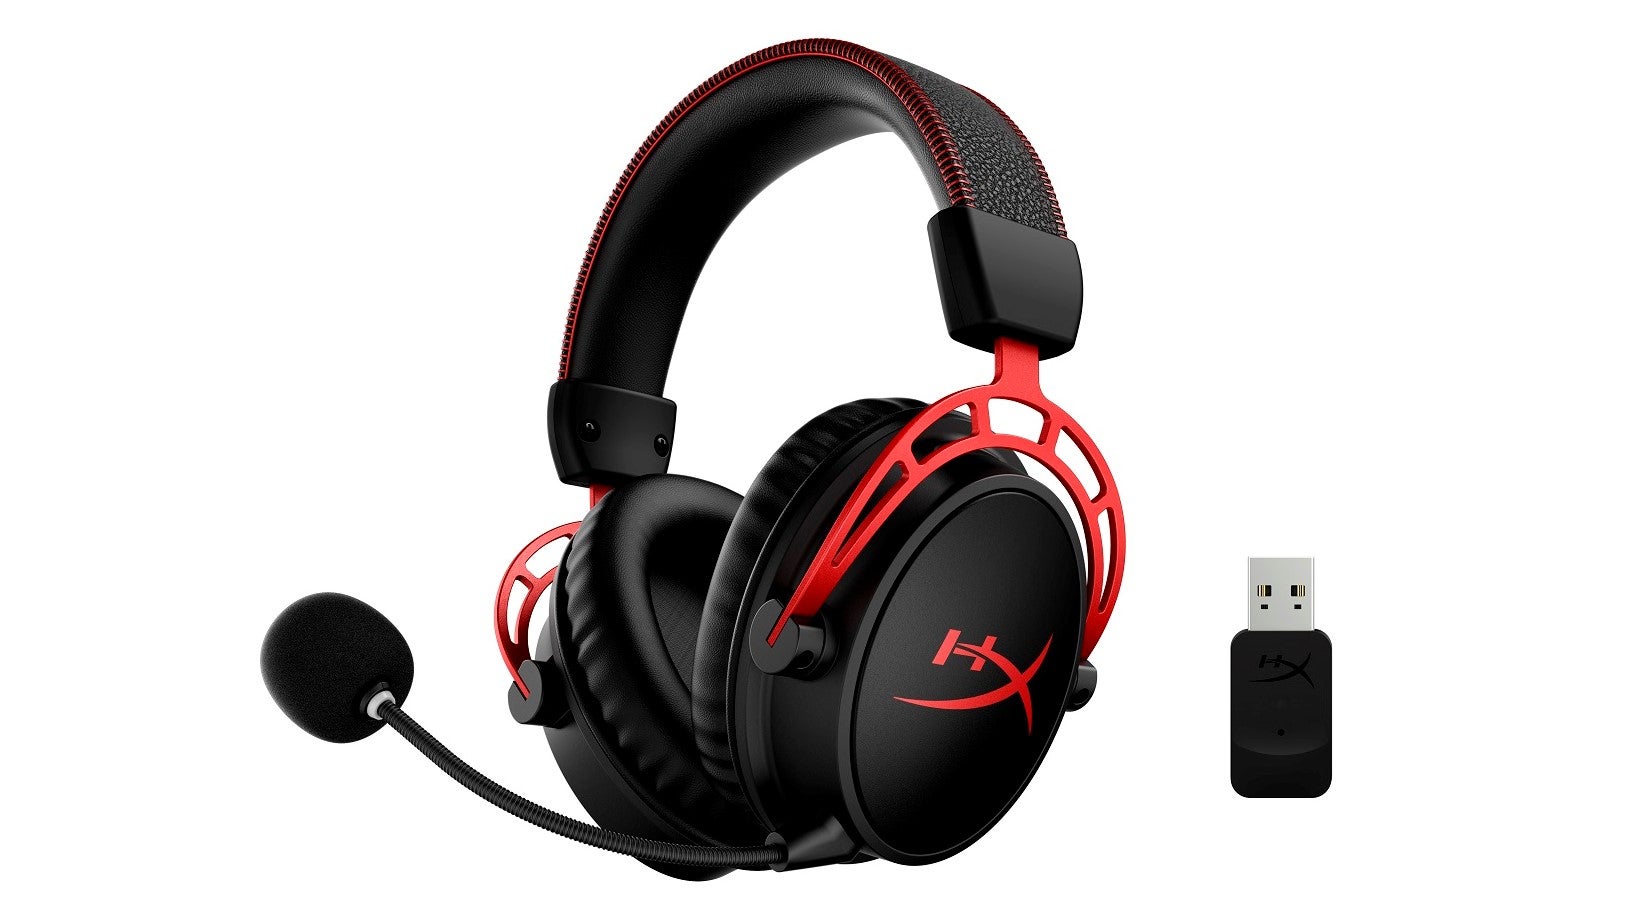 The HyperX Cloud Alpha Wireless gaming headset against a white background.